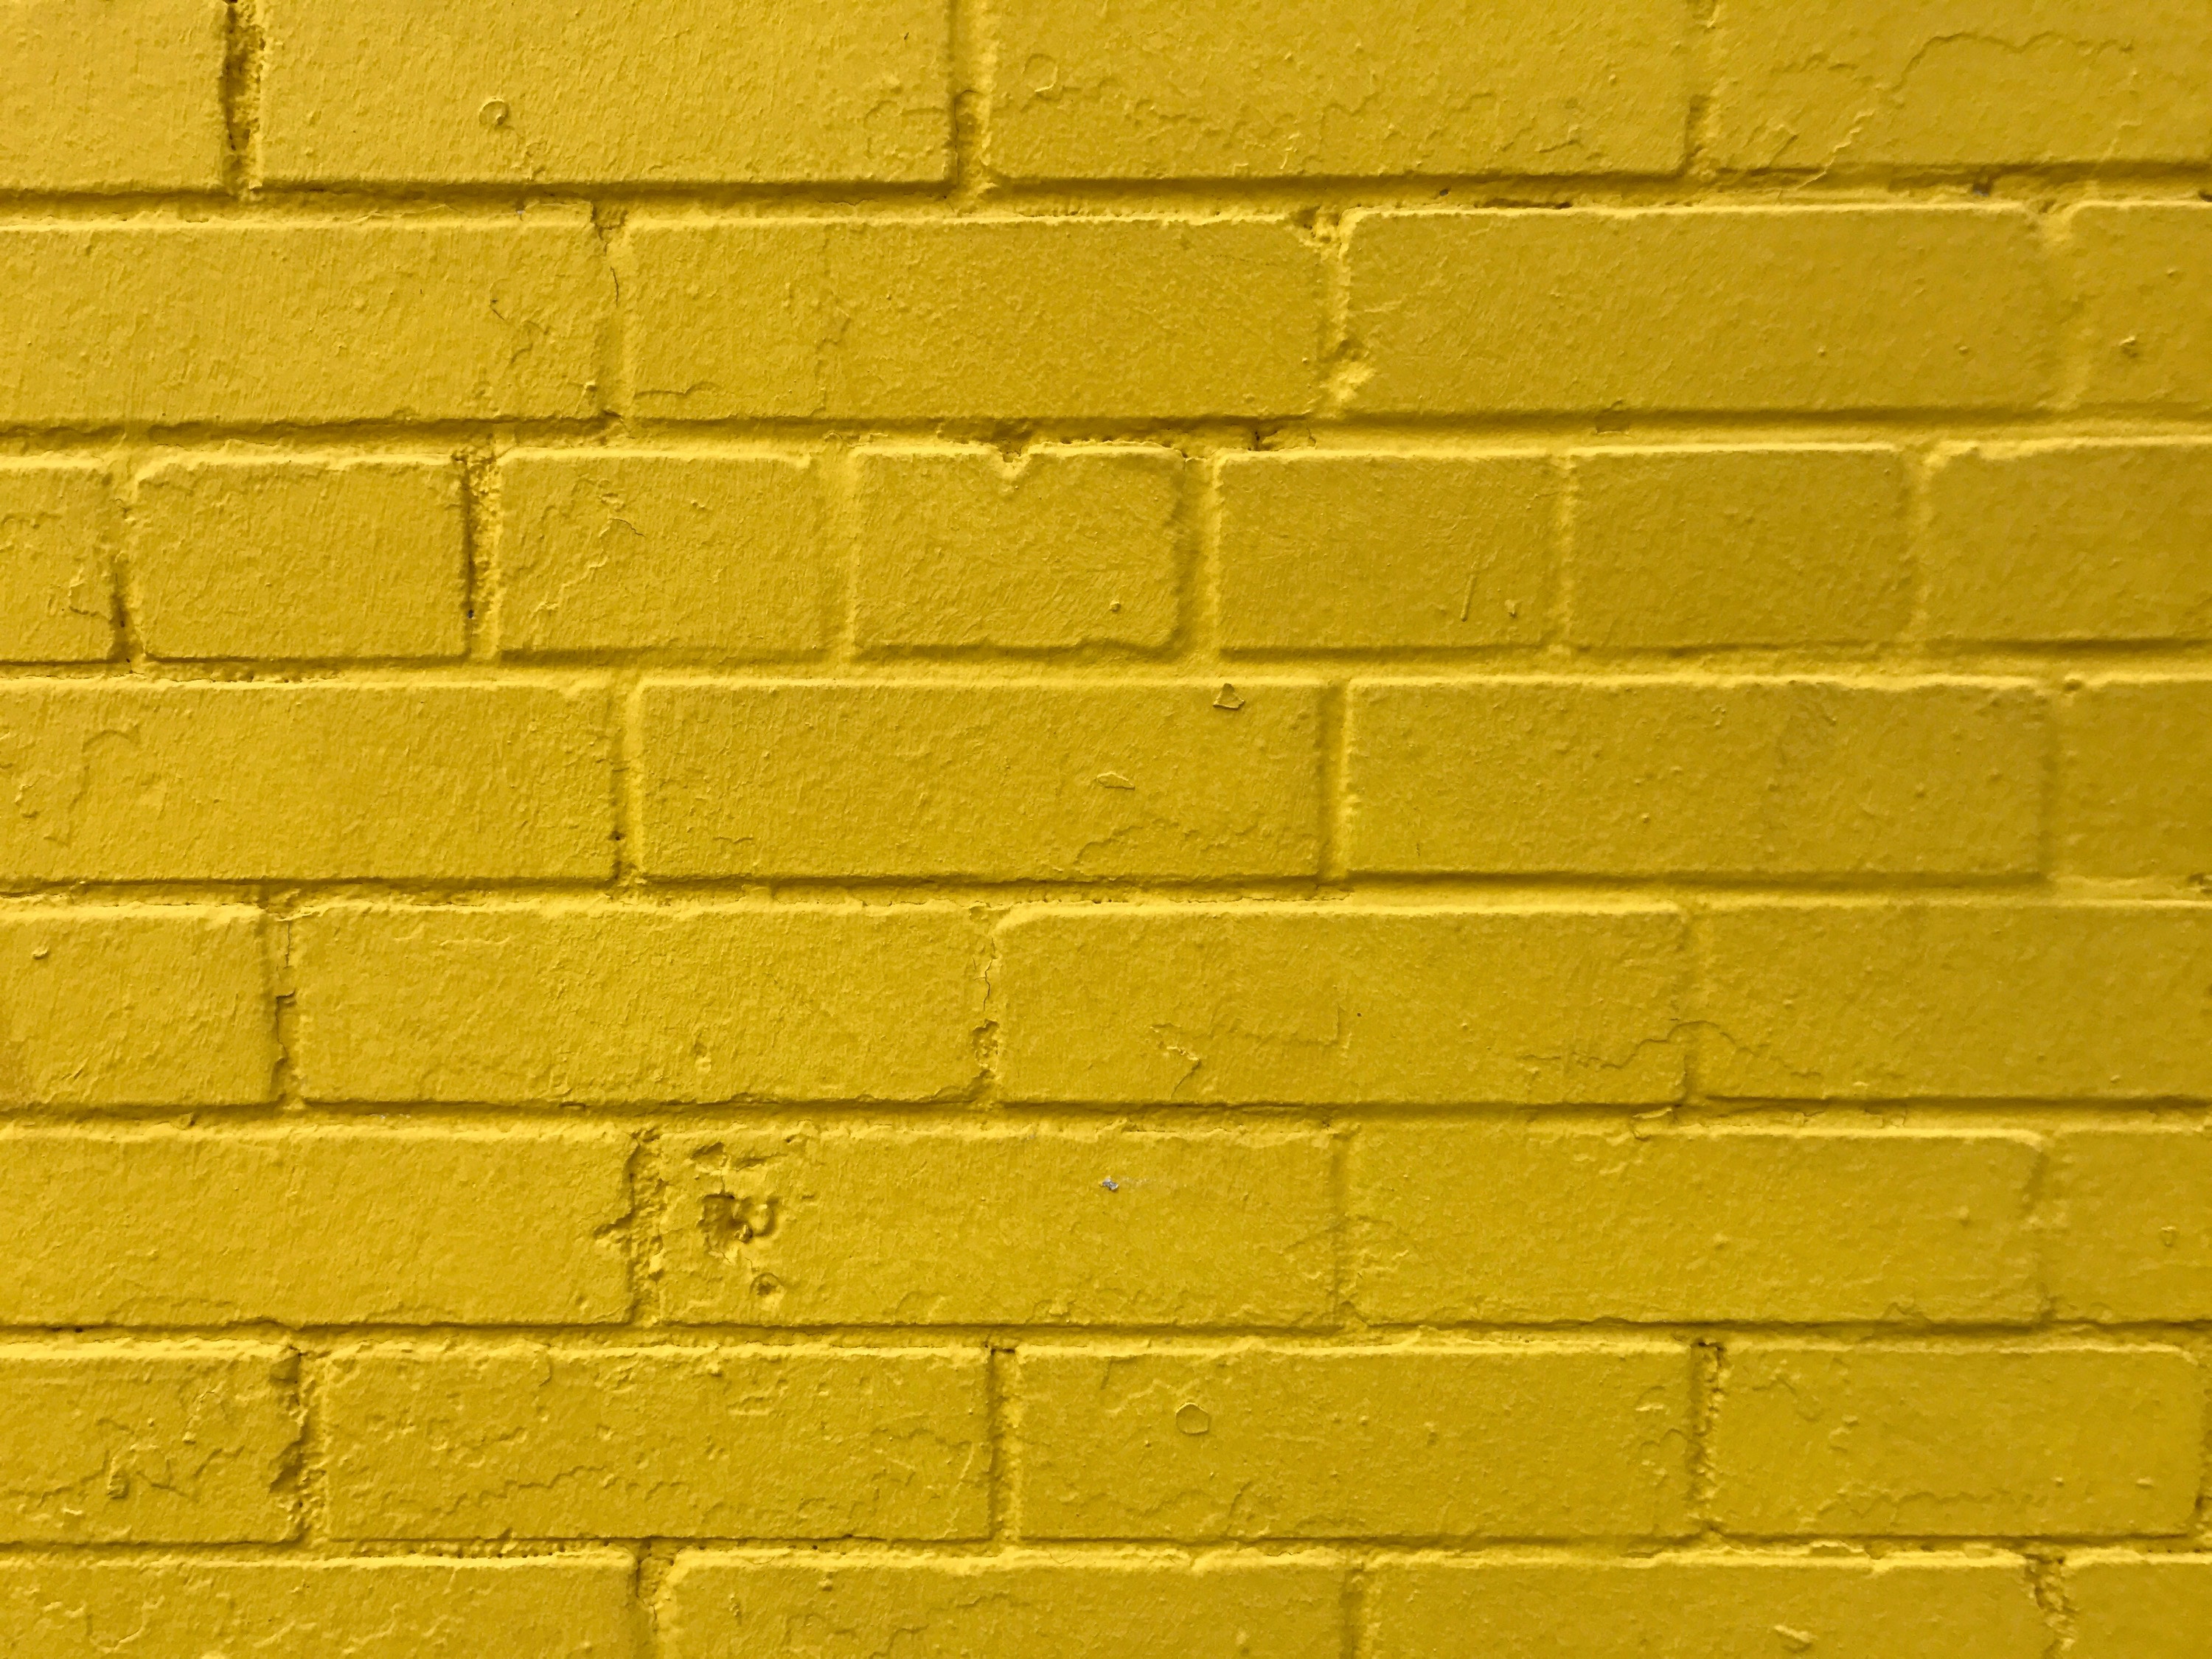 89169 download wallpaper textures, yellow, texture, wall, bricks screensavers and pictures for free